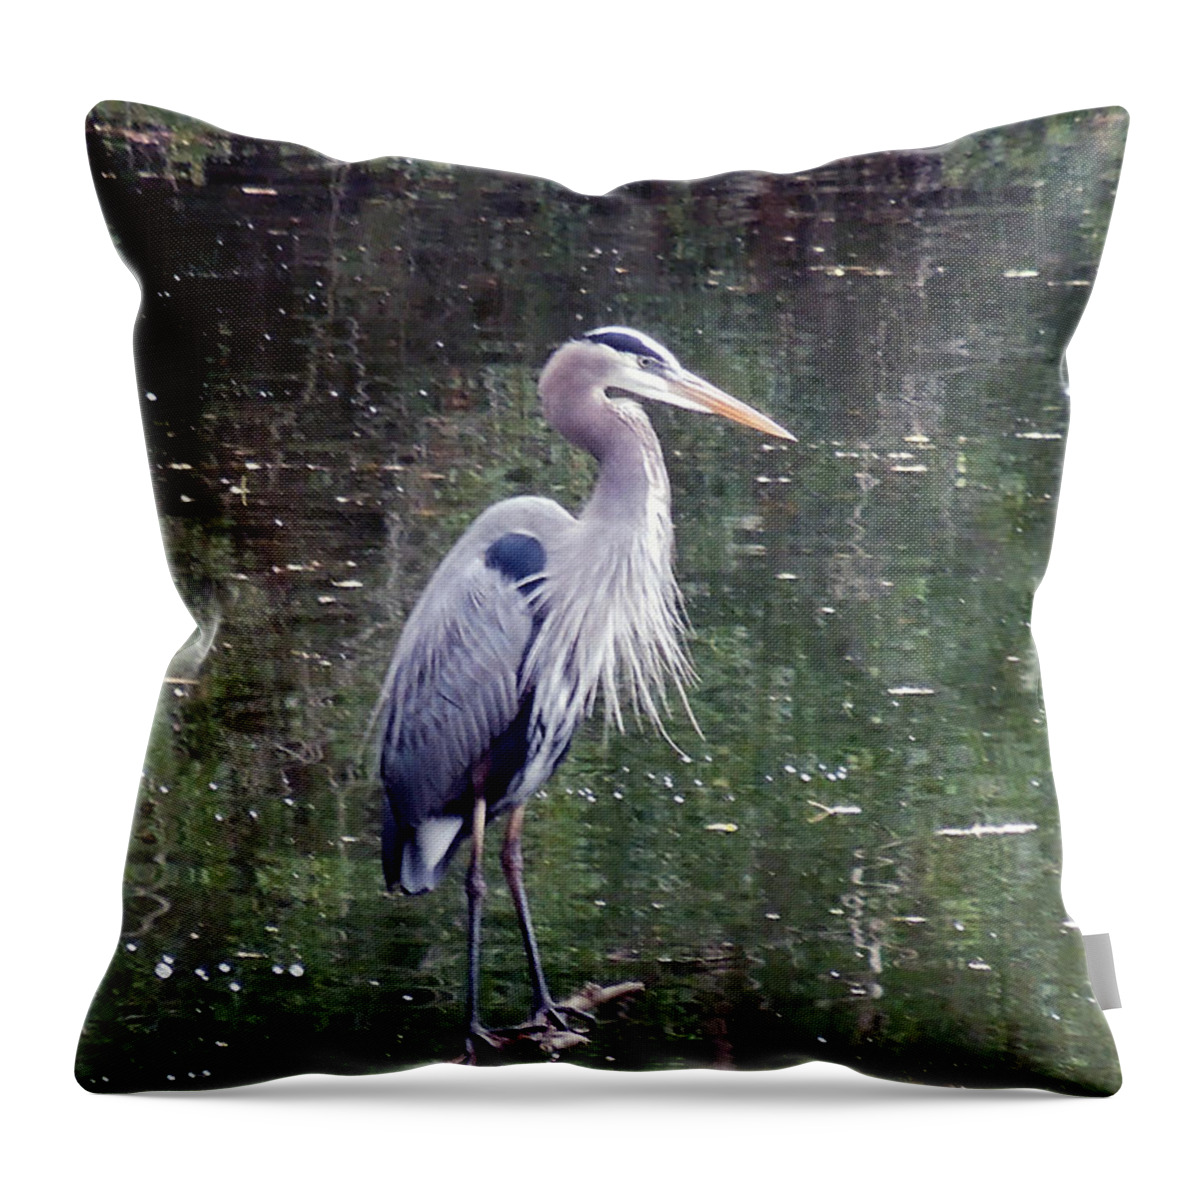 Blue Heron Throw Pillow featuring the photograph Blue Heron Fishing by Don Wright